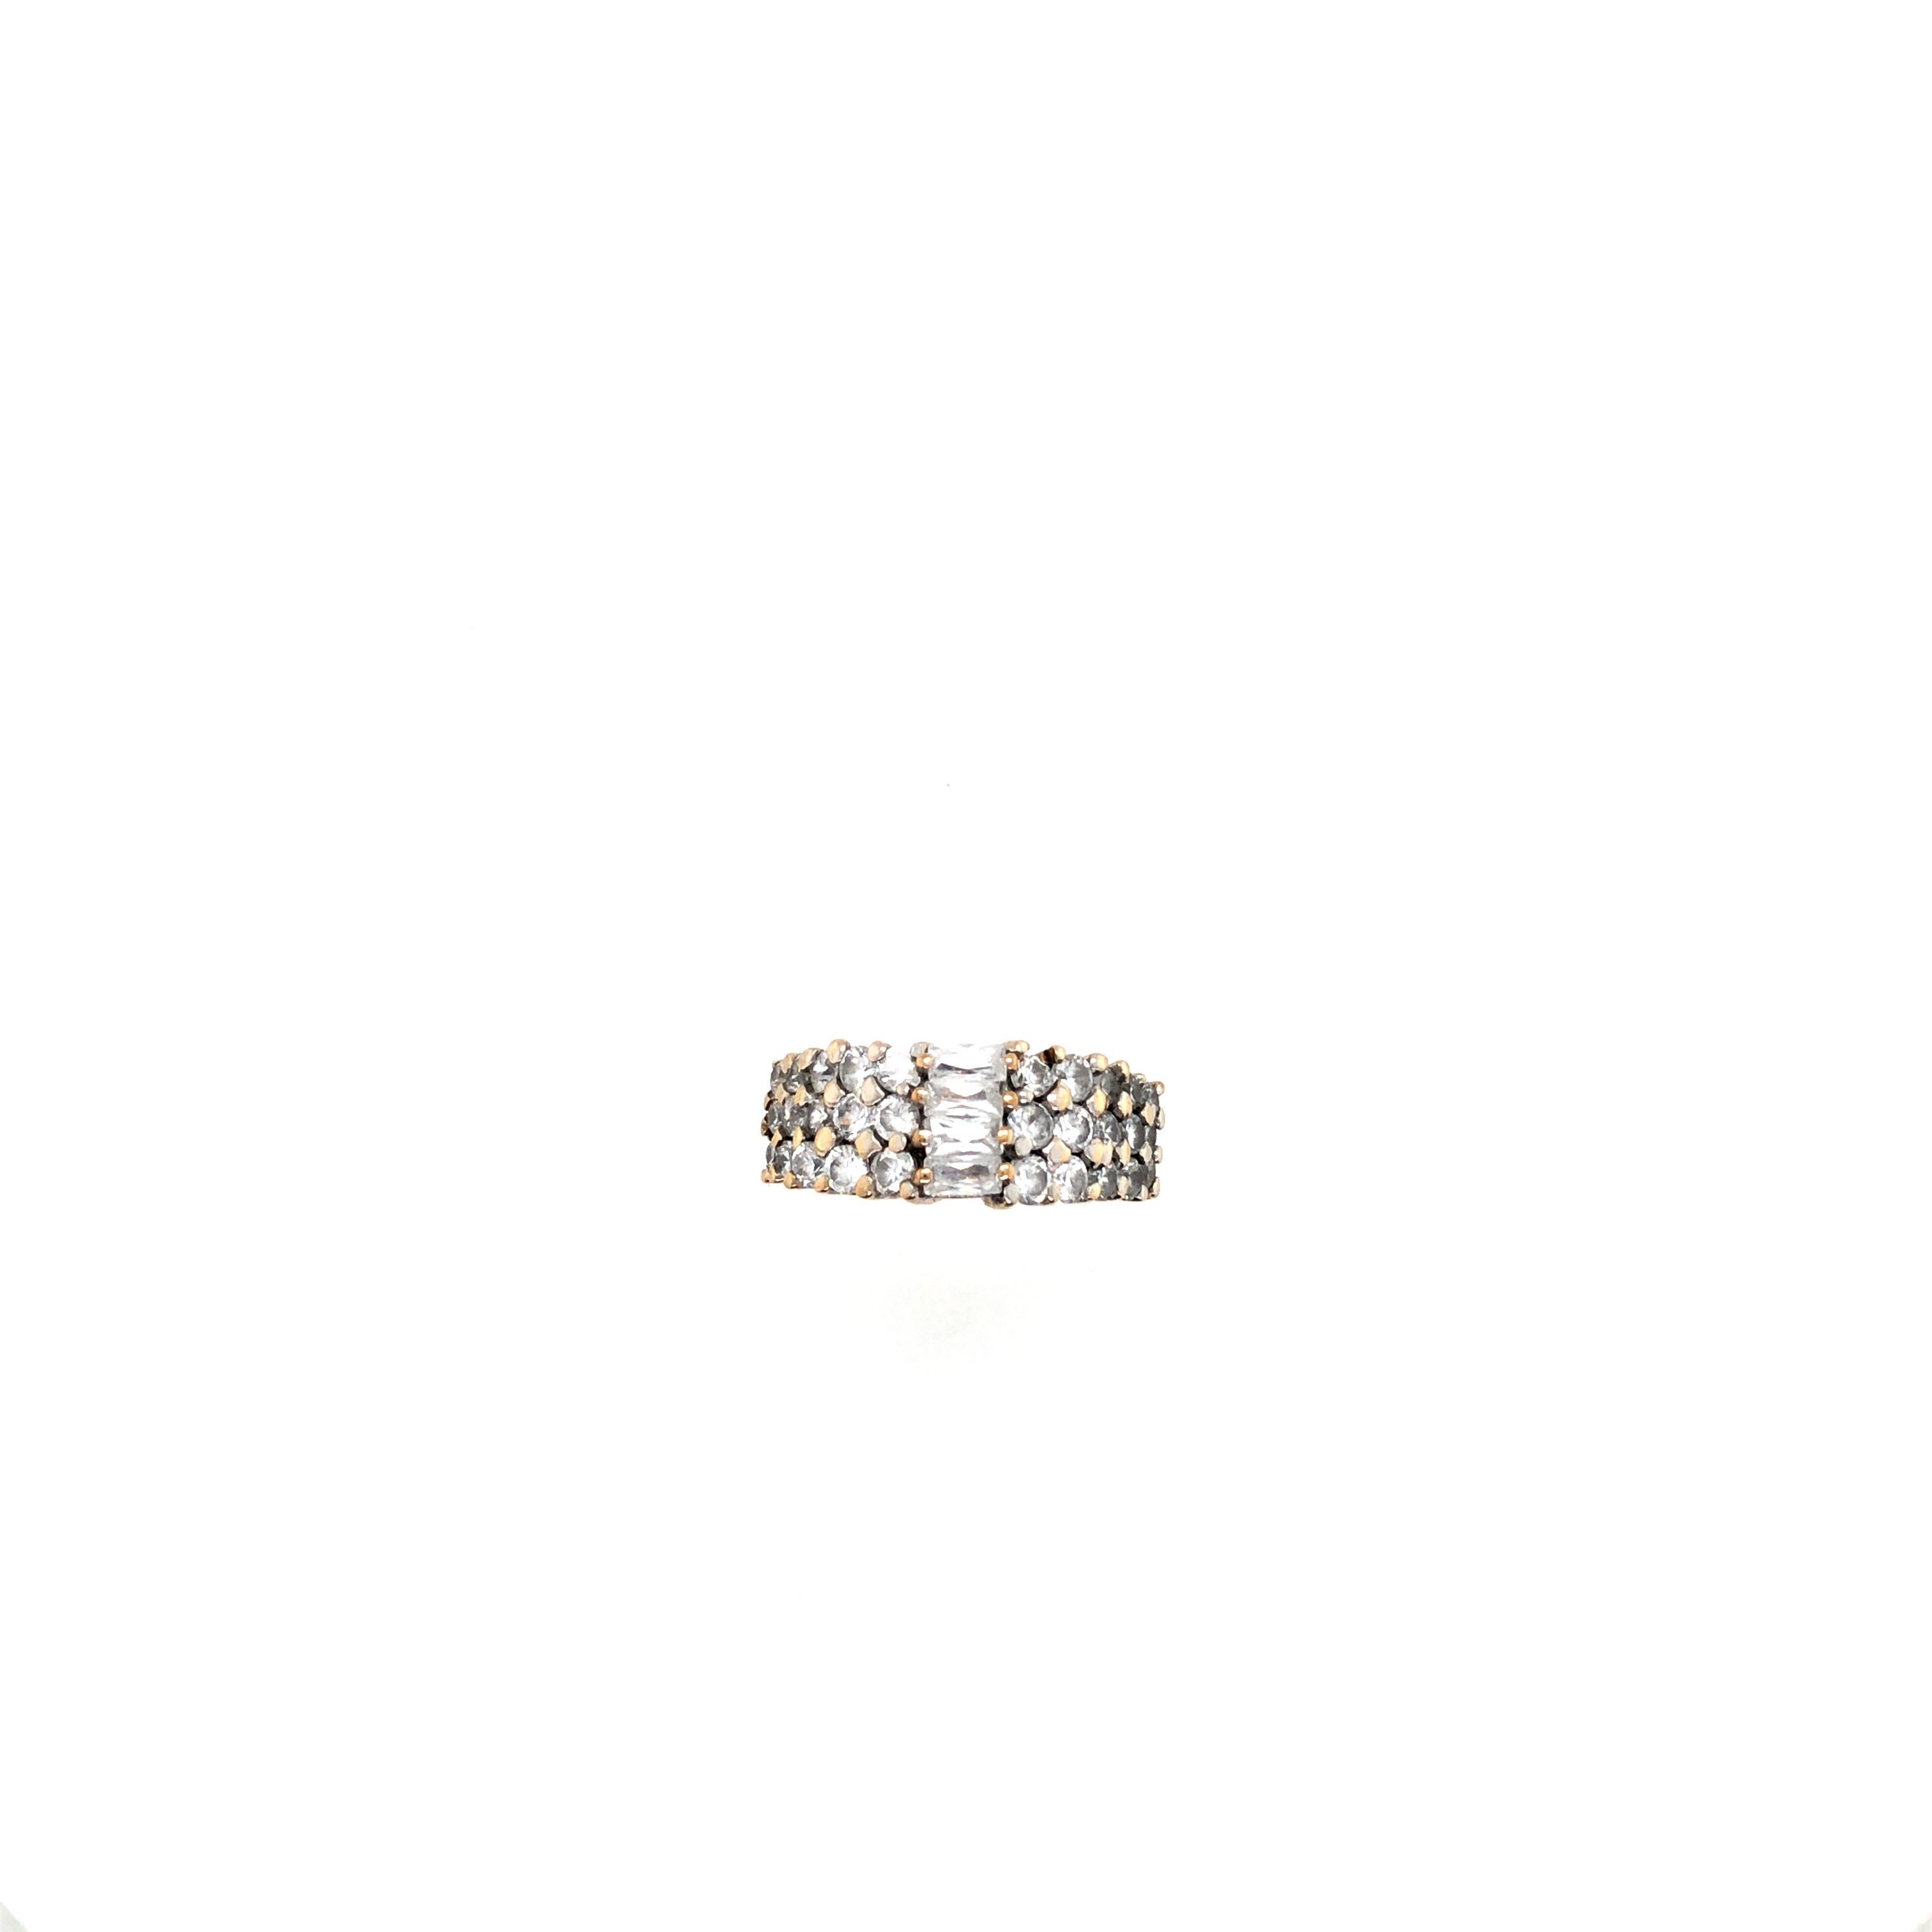 A HALLMARKED 9ct GOLD TAPERED CLAW SET CUBIC ZIRCONIA RING. FINGER SIZE N. WEIGHT 5.18grms. - Image 4 of 4